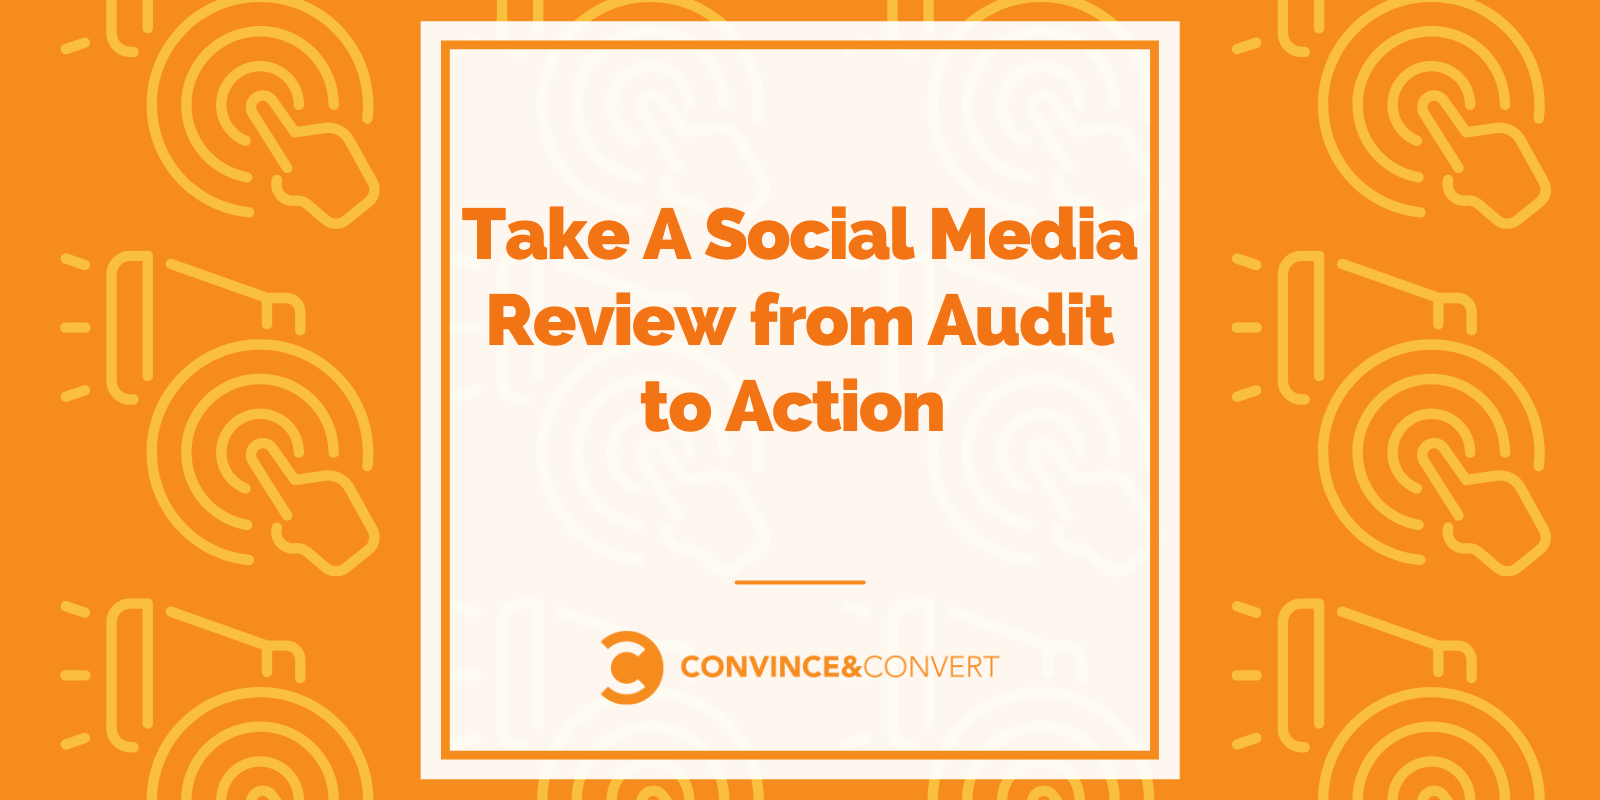 Take A Social Media Review from Audit to Action